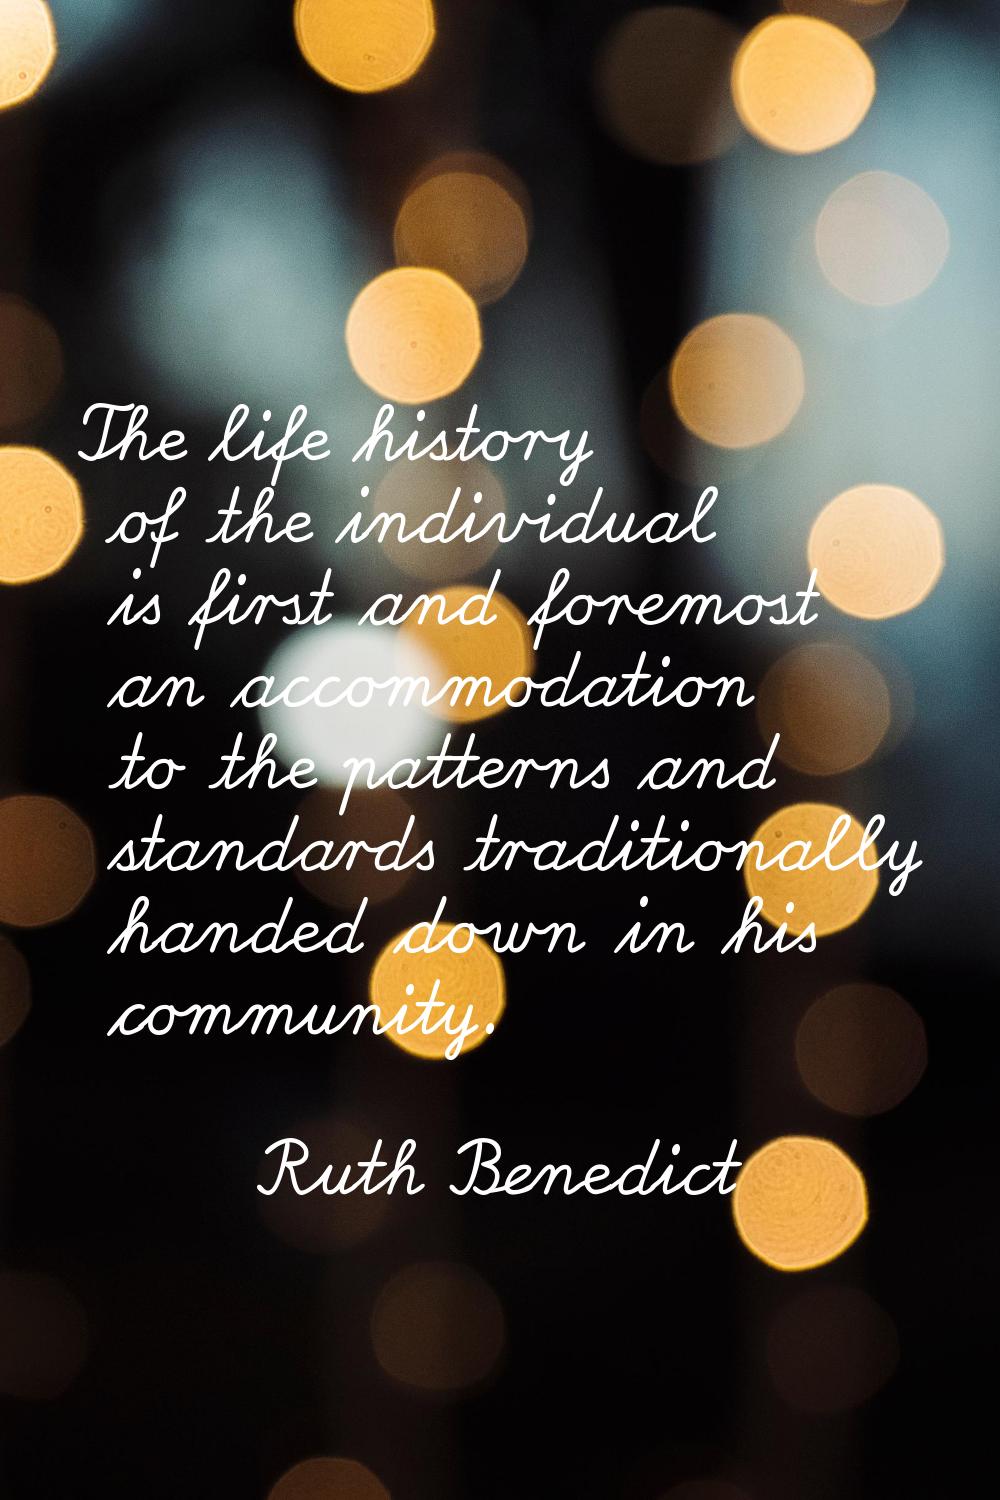 The life history of the individual is first and foremost an accommodation to the patterns and stand